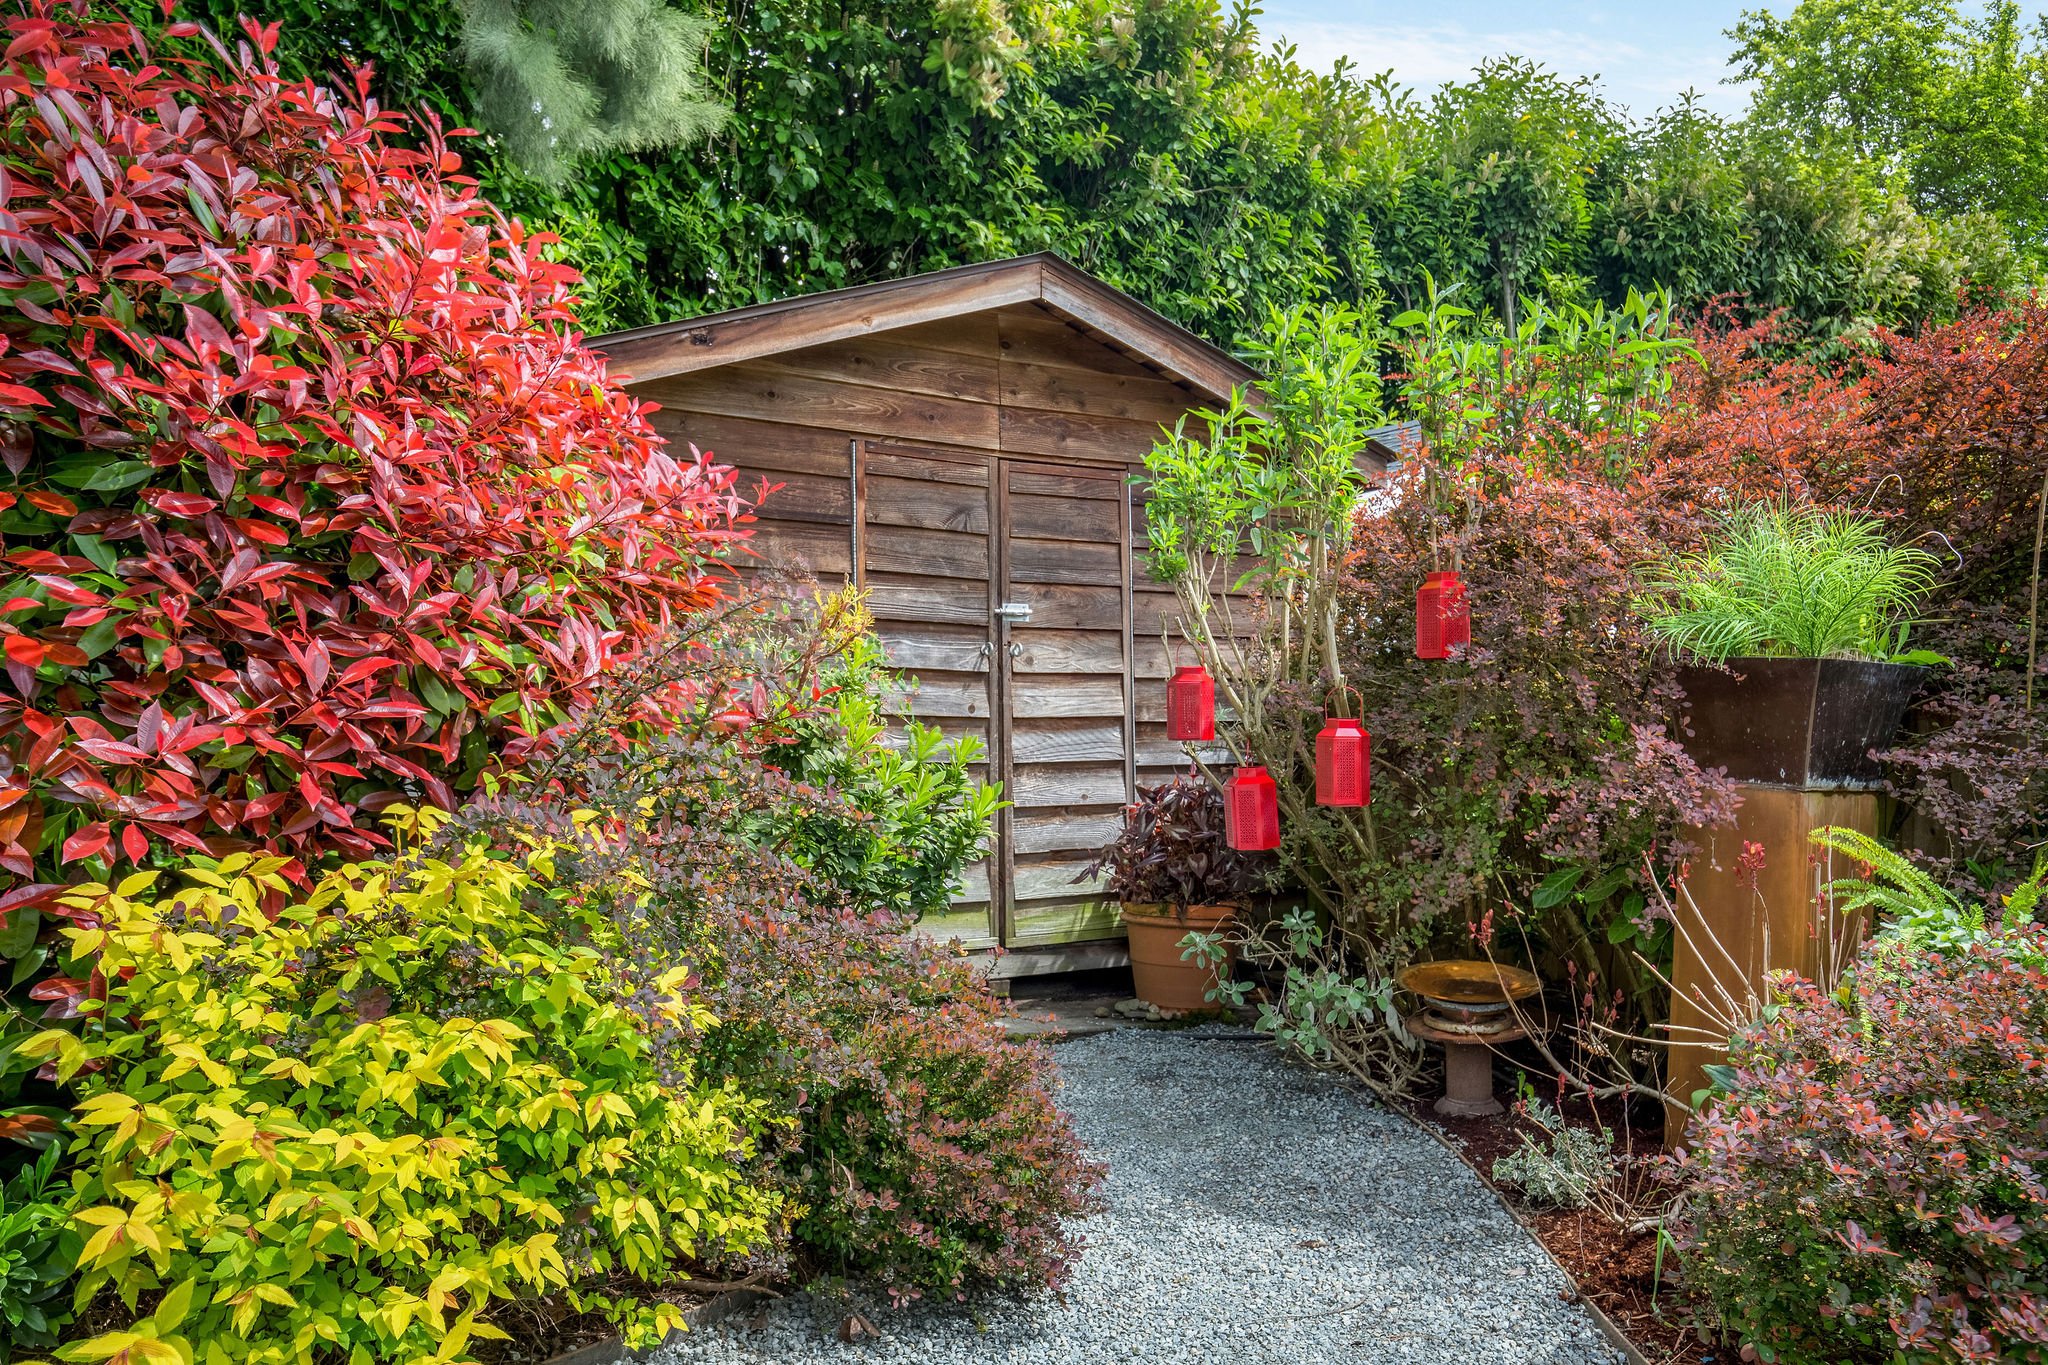  image description: exterior of patio with shed and garden 